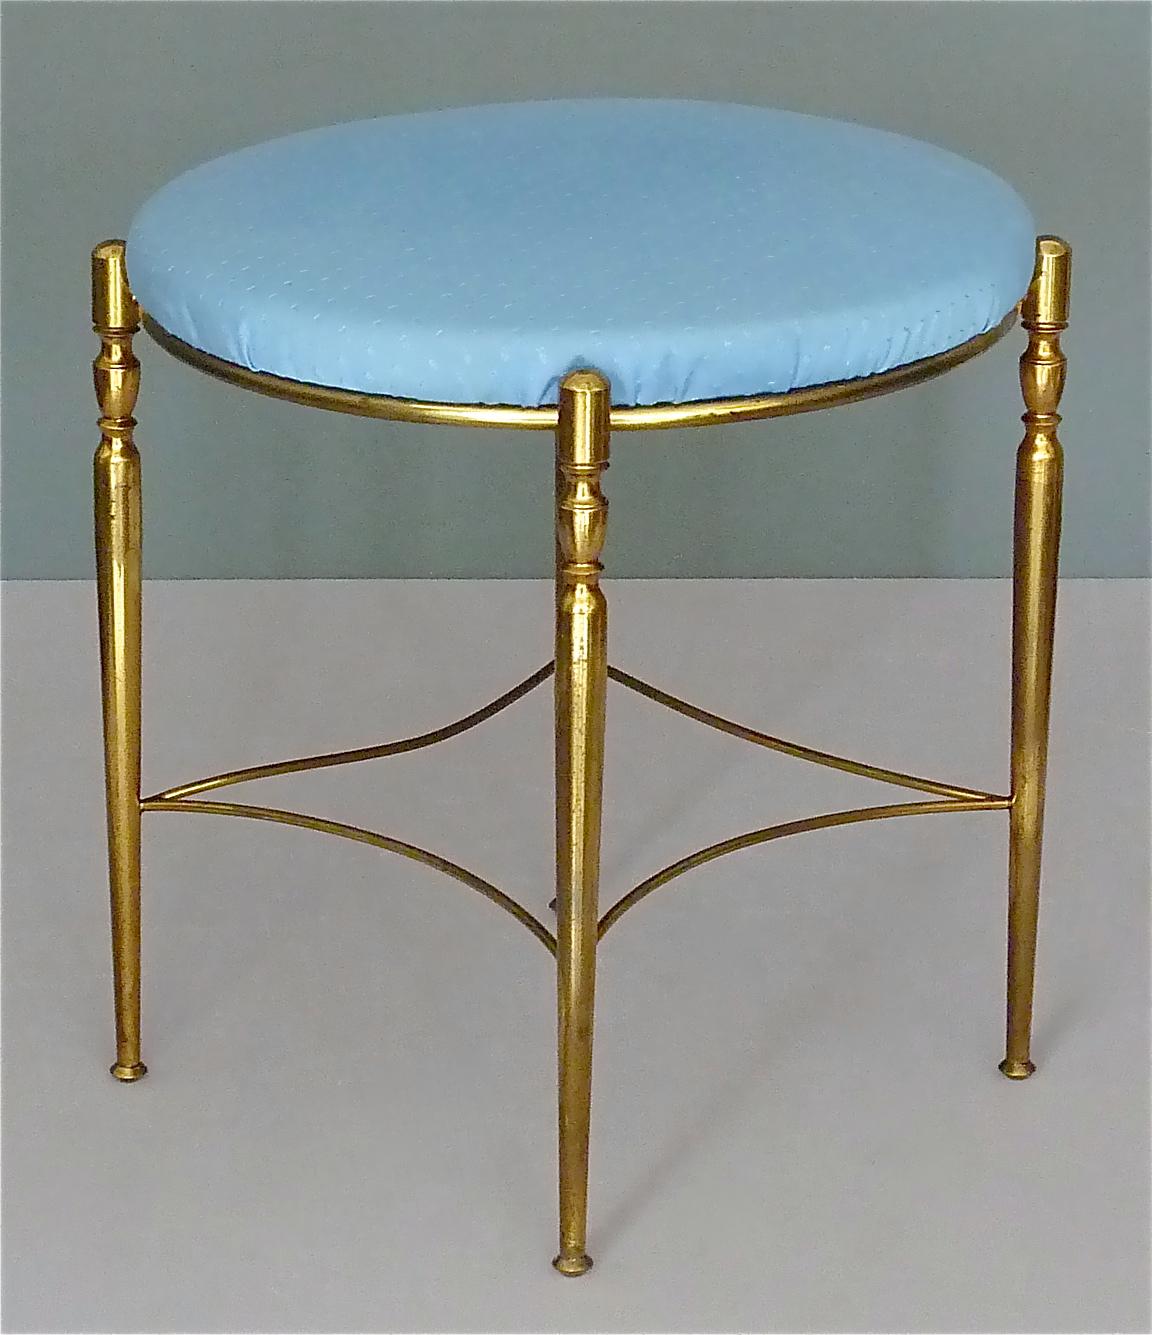 Patinated Rare Midcentury Maison Jansen Brass Stool Side Chair 1950s Charles Bagues Era